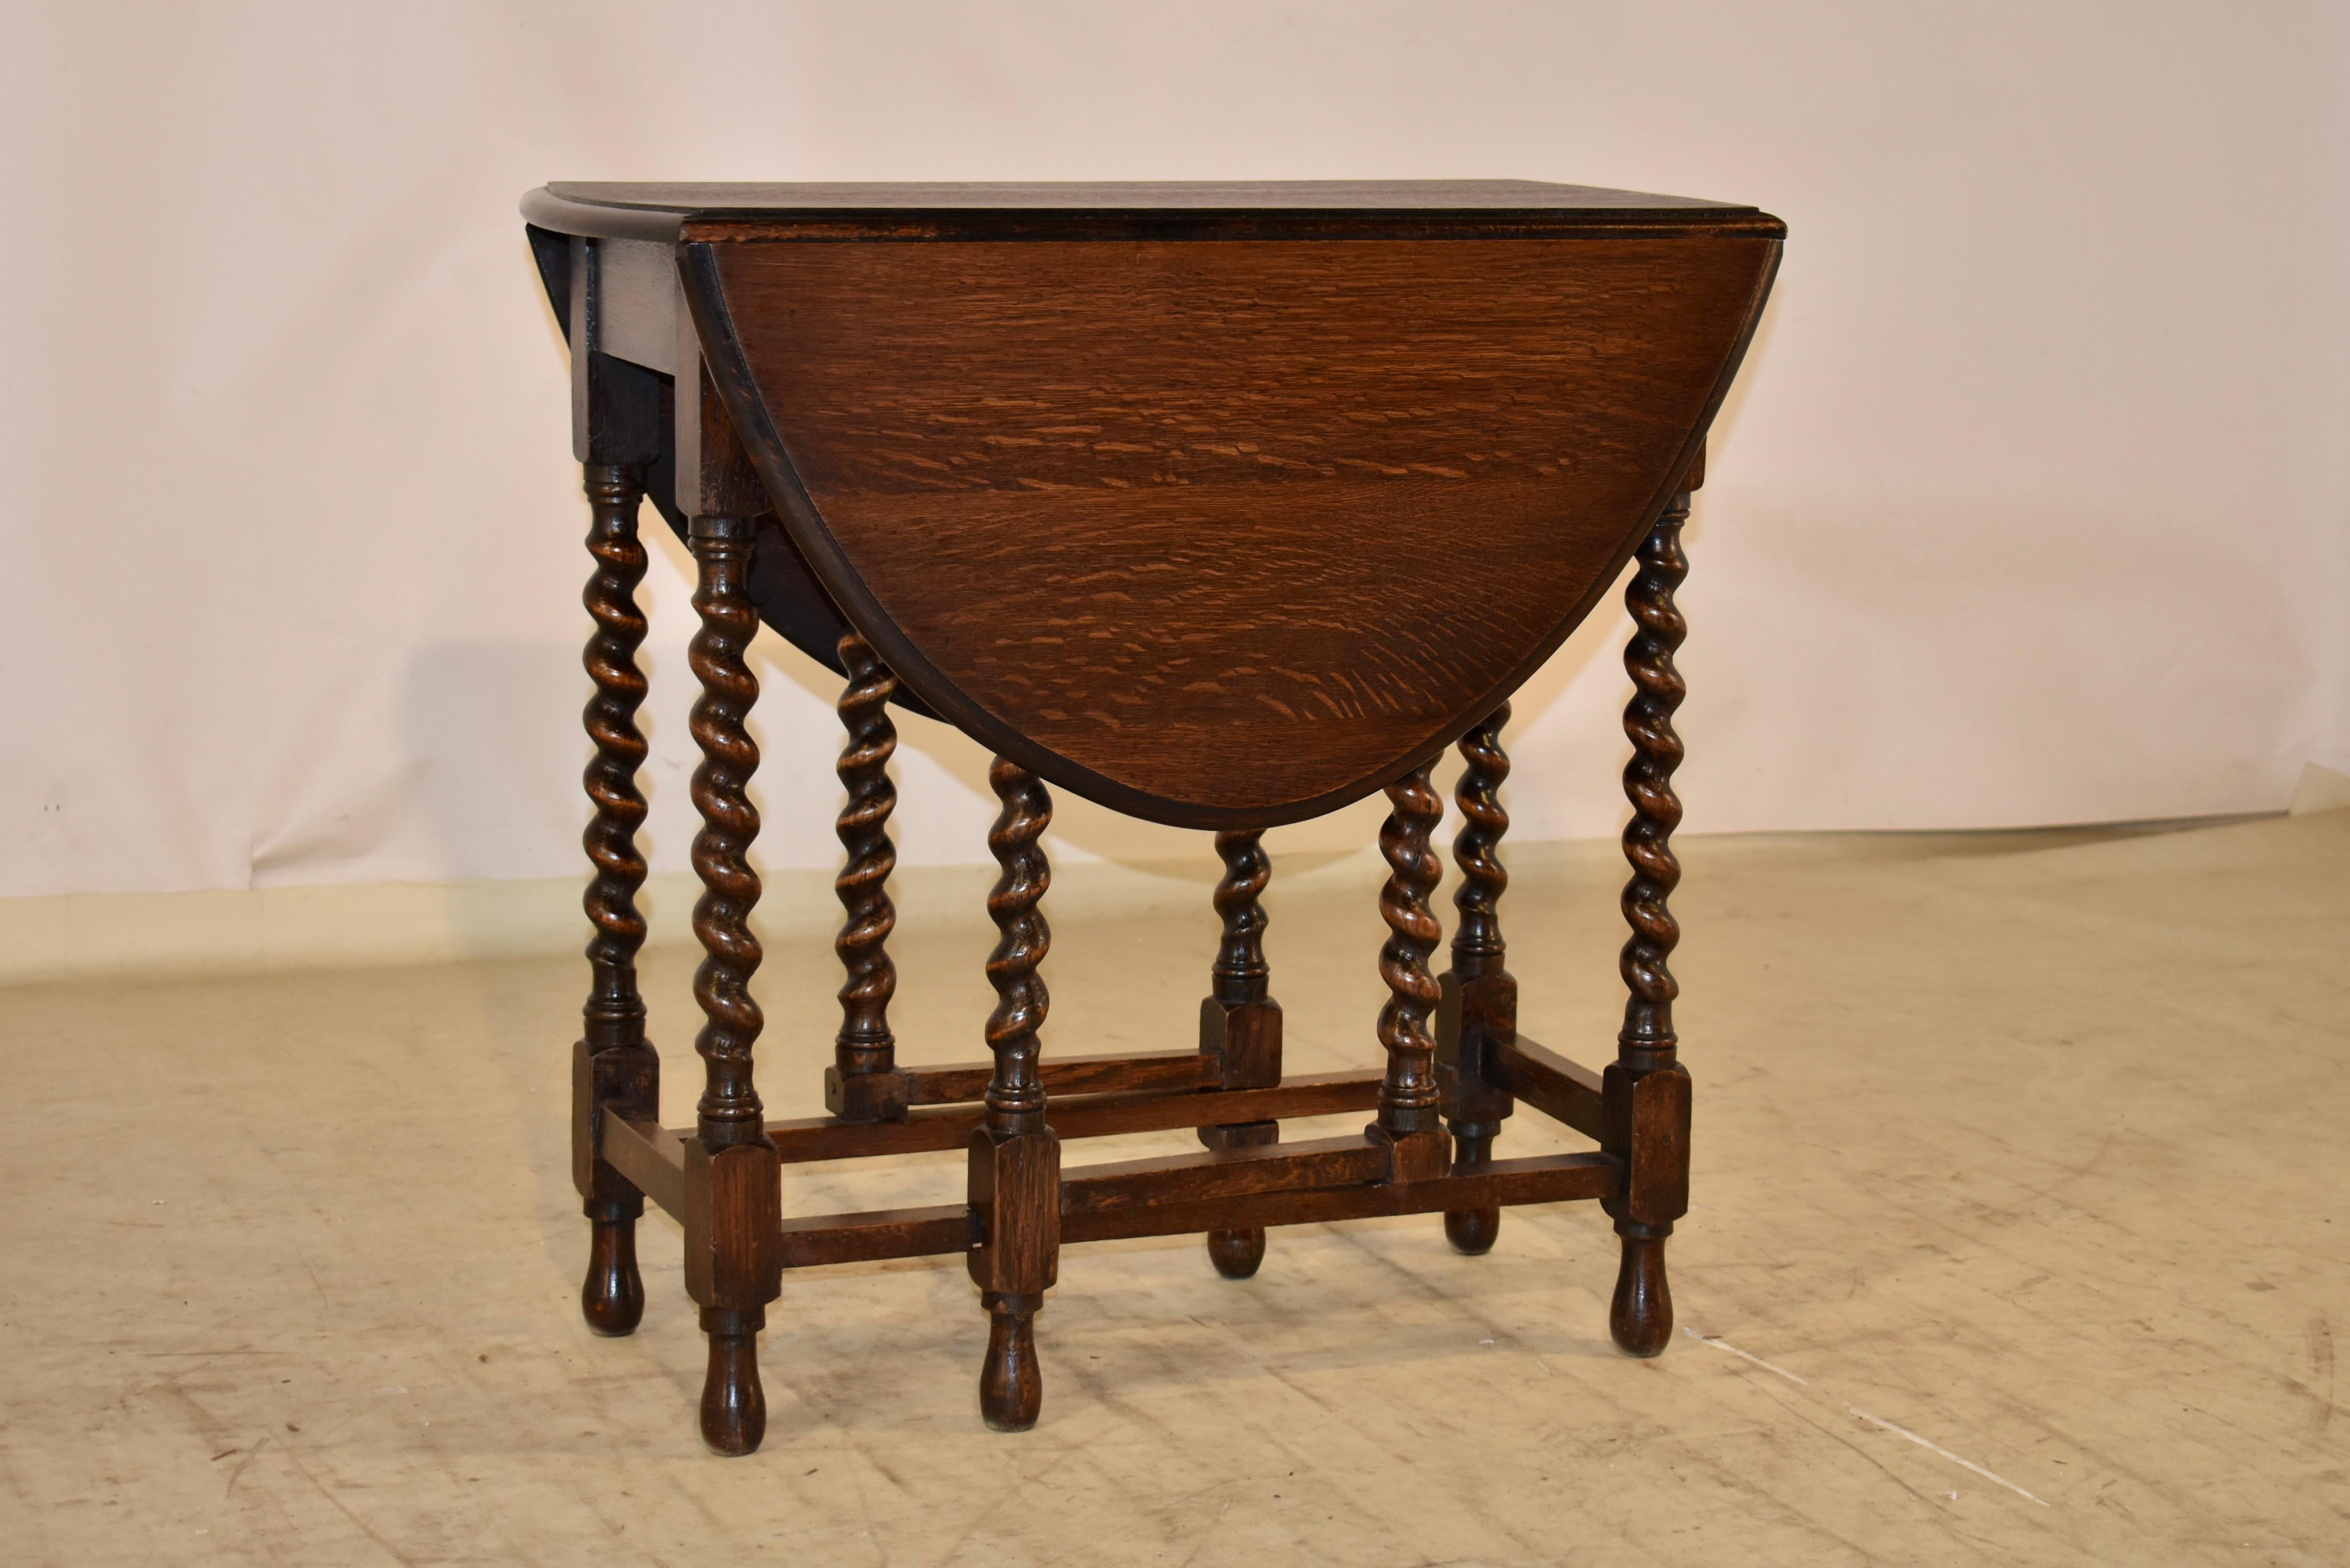 Period Edwardian gate leg table from England.  The top has a beveled edge , following down to a simple apron and supported on hand turned barely twist legs and gates.  The legs are joined by simple stretchers, and raised on hand turned feet.  The